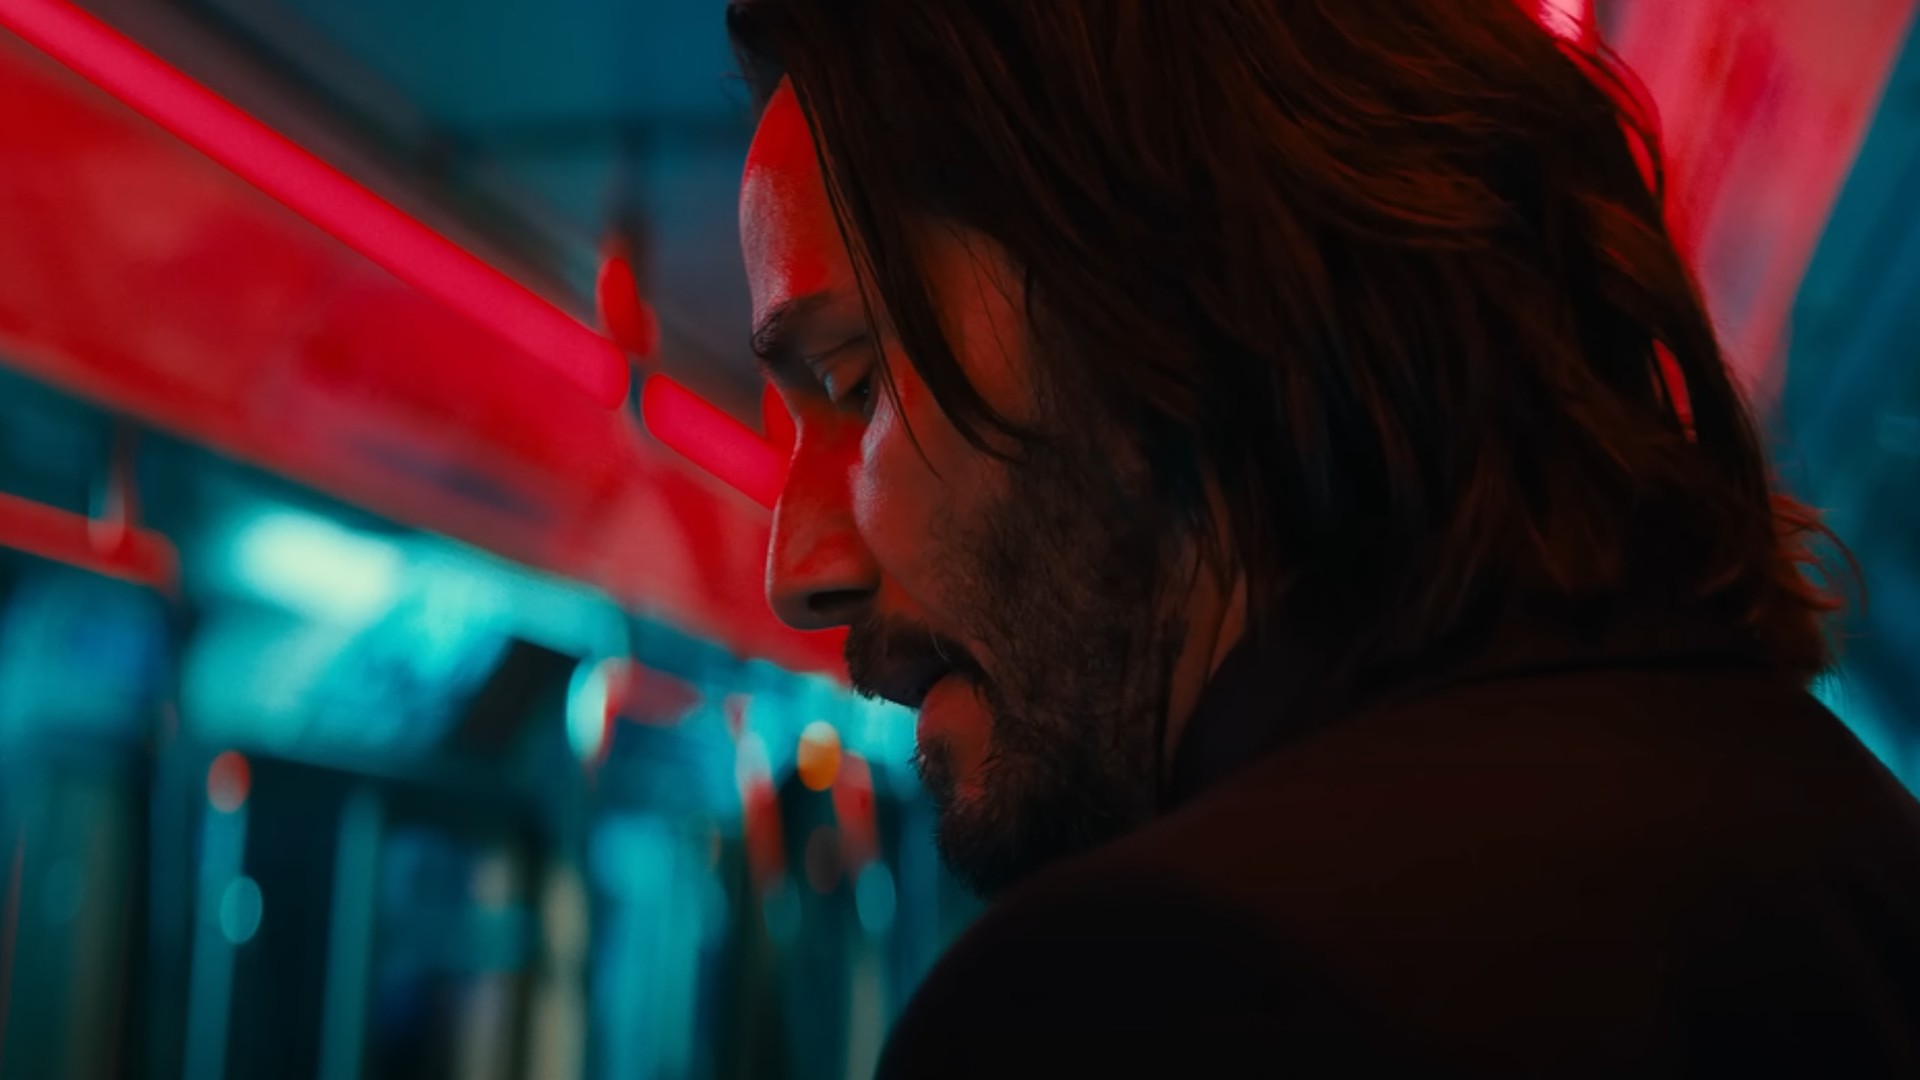 Vista Cinemas - Check out this John Wick: Chapter 4